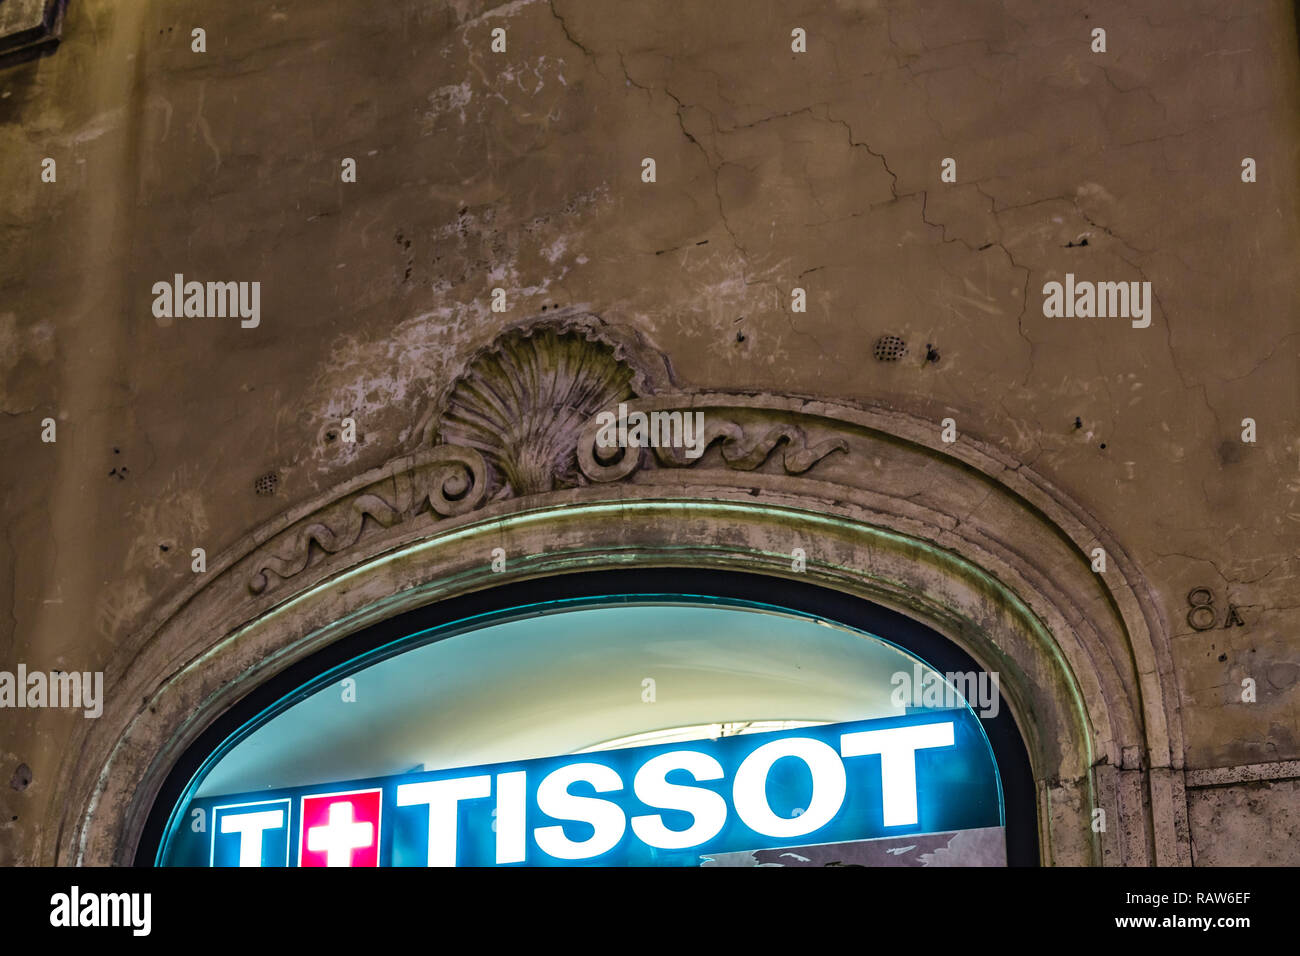 ROME, ITALY - JANUARY 3, 2019: lights are enlightening TISSOT logo on storefront at night Stock Photo